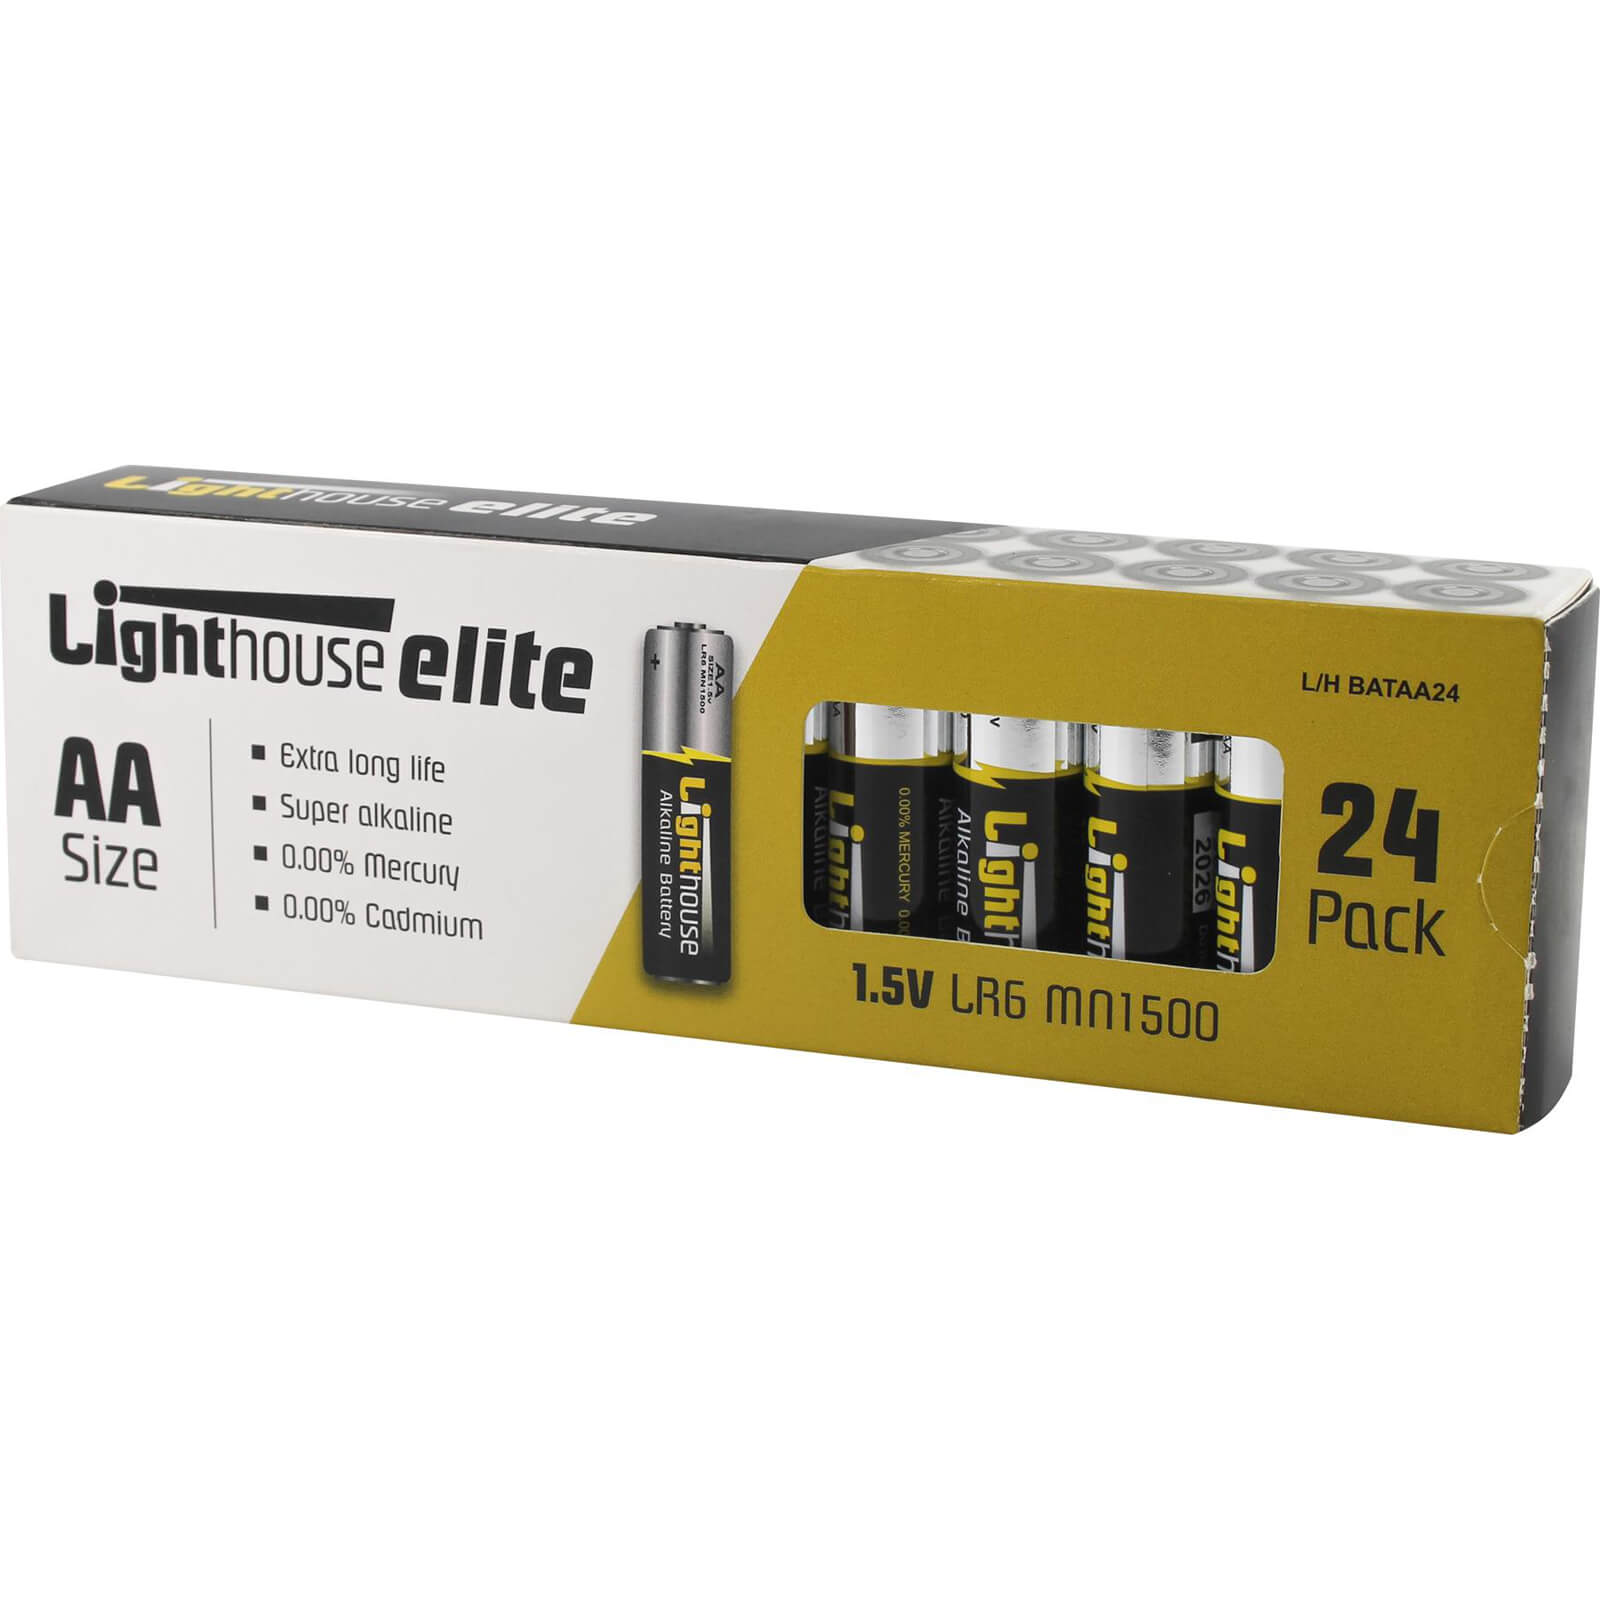 Lighthouse LR6 Extra Long Life AA Alkaline Batteries Pack of 24